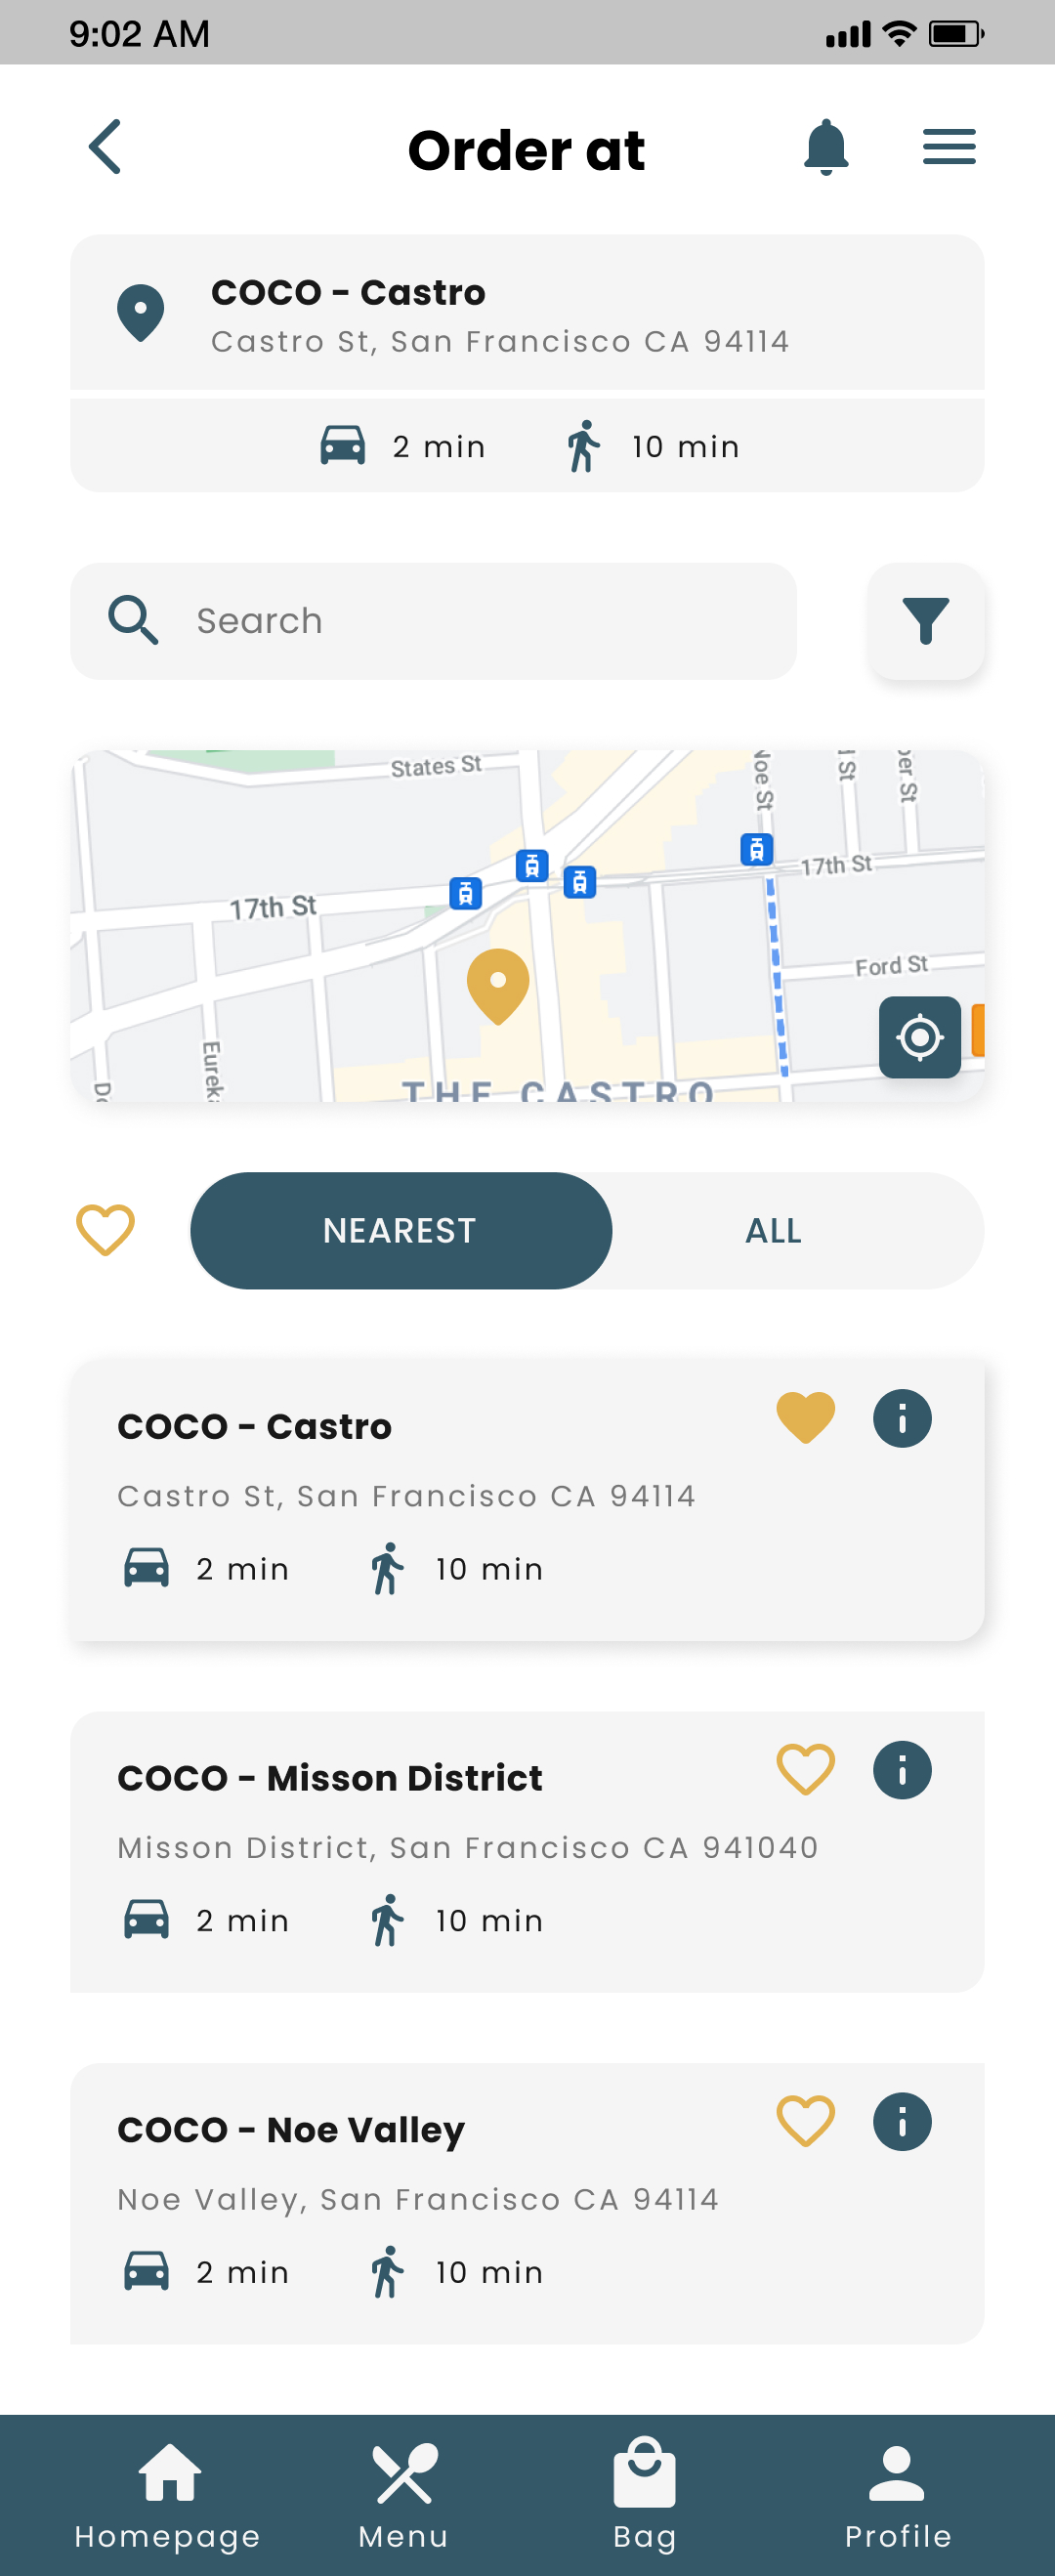 COCO Locations screen for mobile app